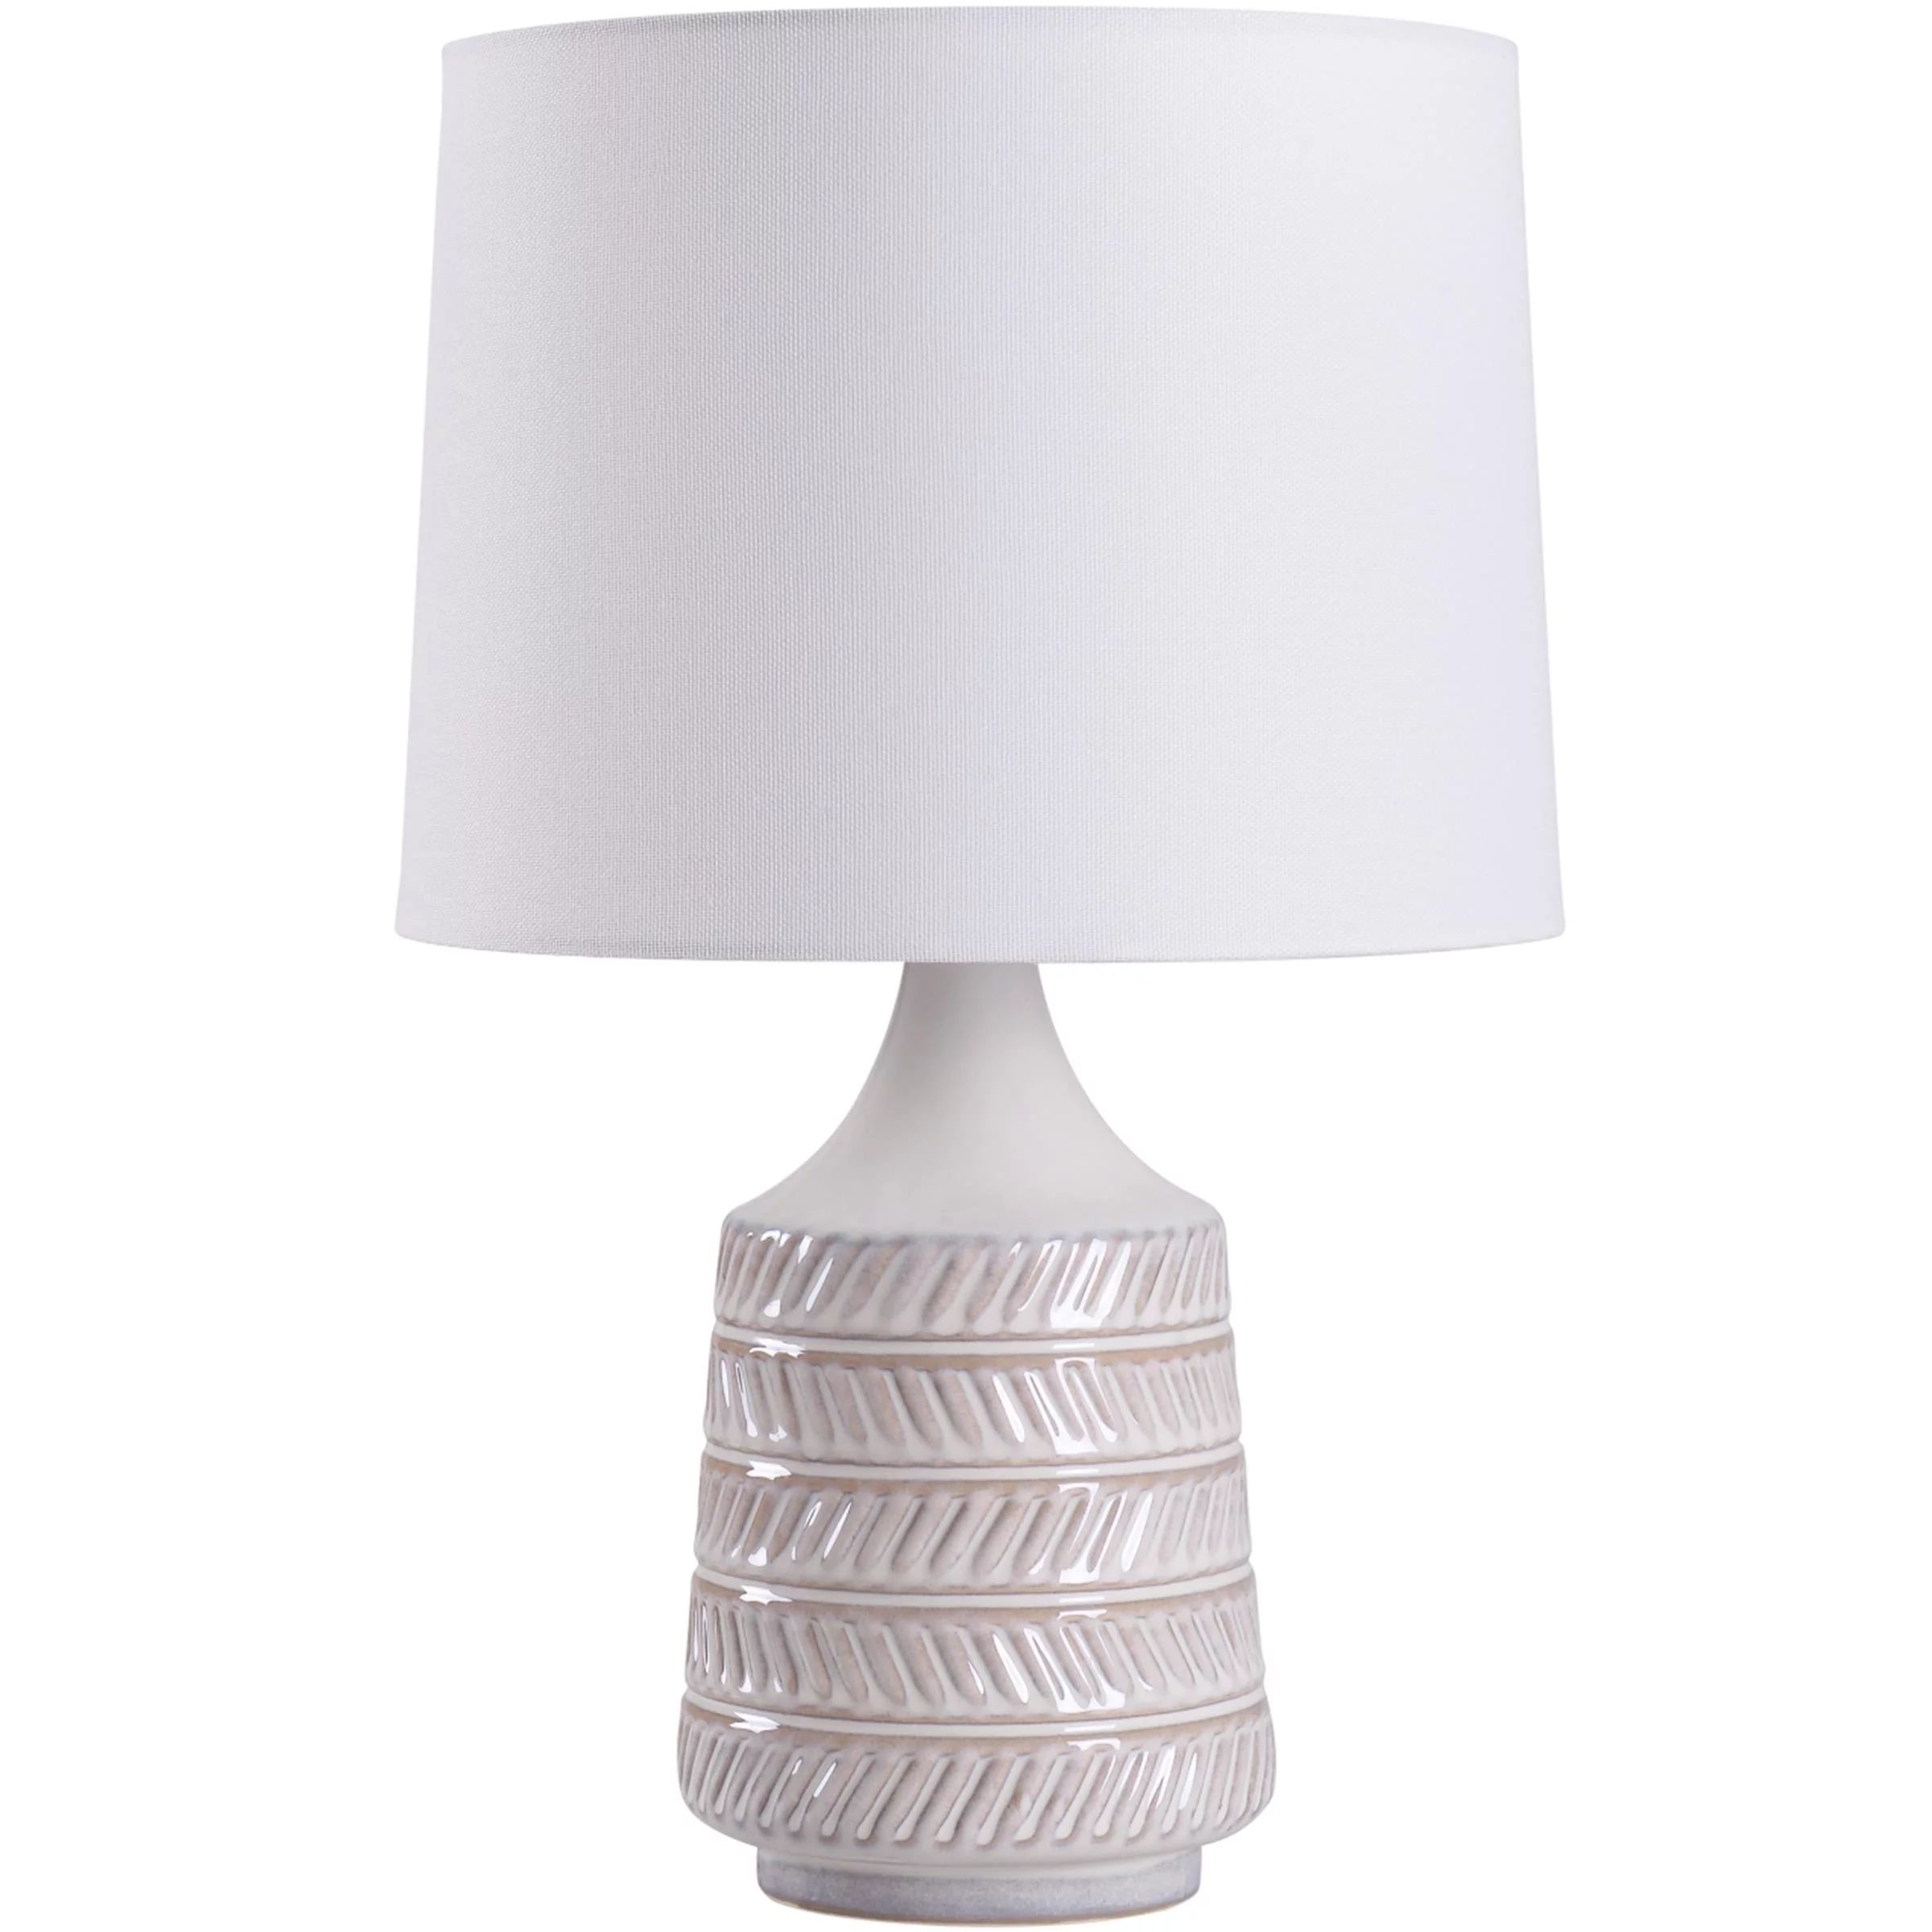 Mainstays White and Beige Etched Ceramic Table Lamp with Shade 17"H | Walmart (US)